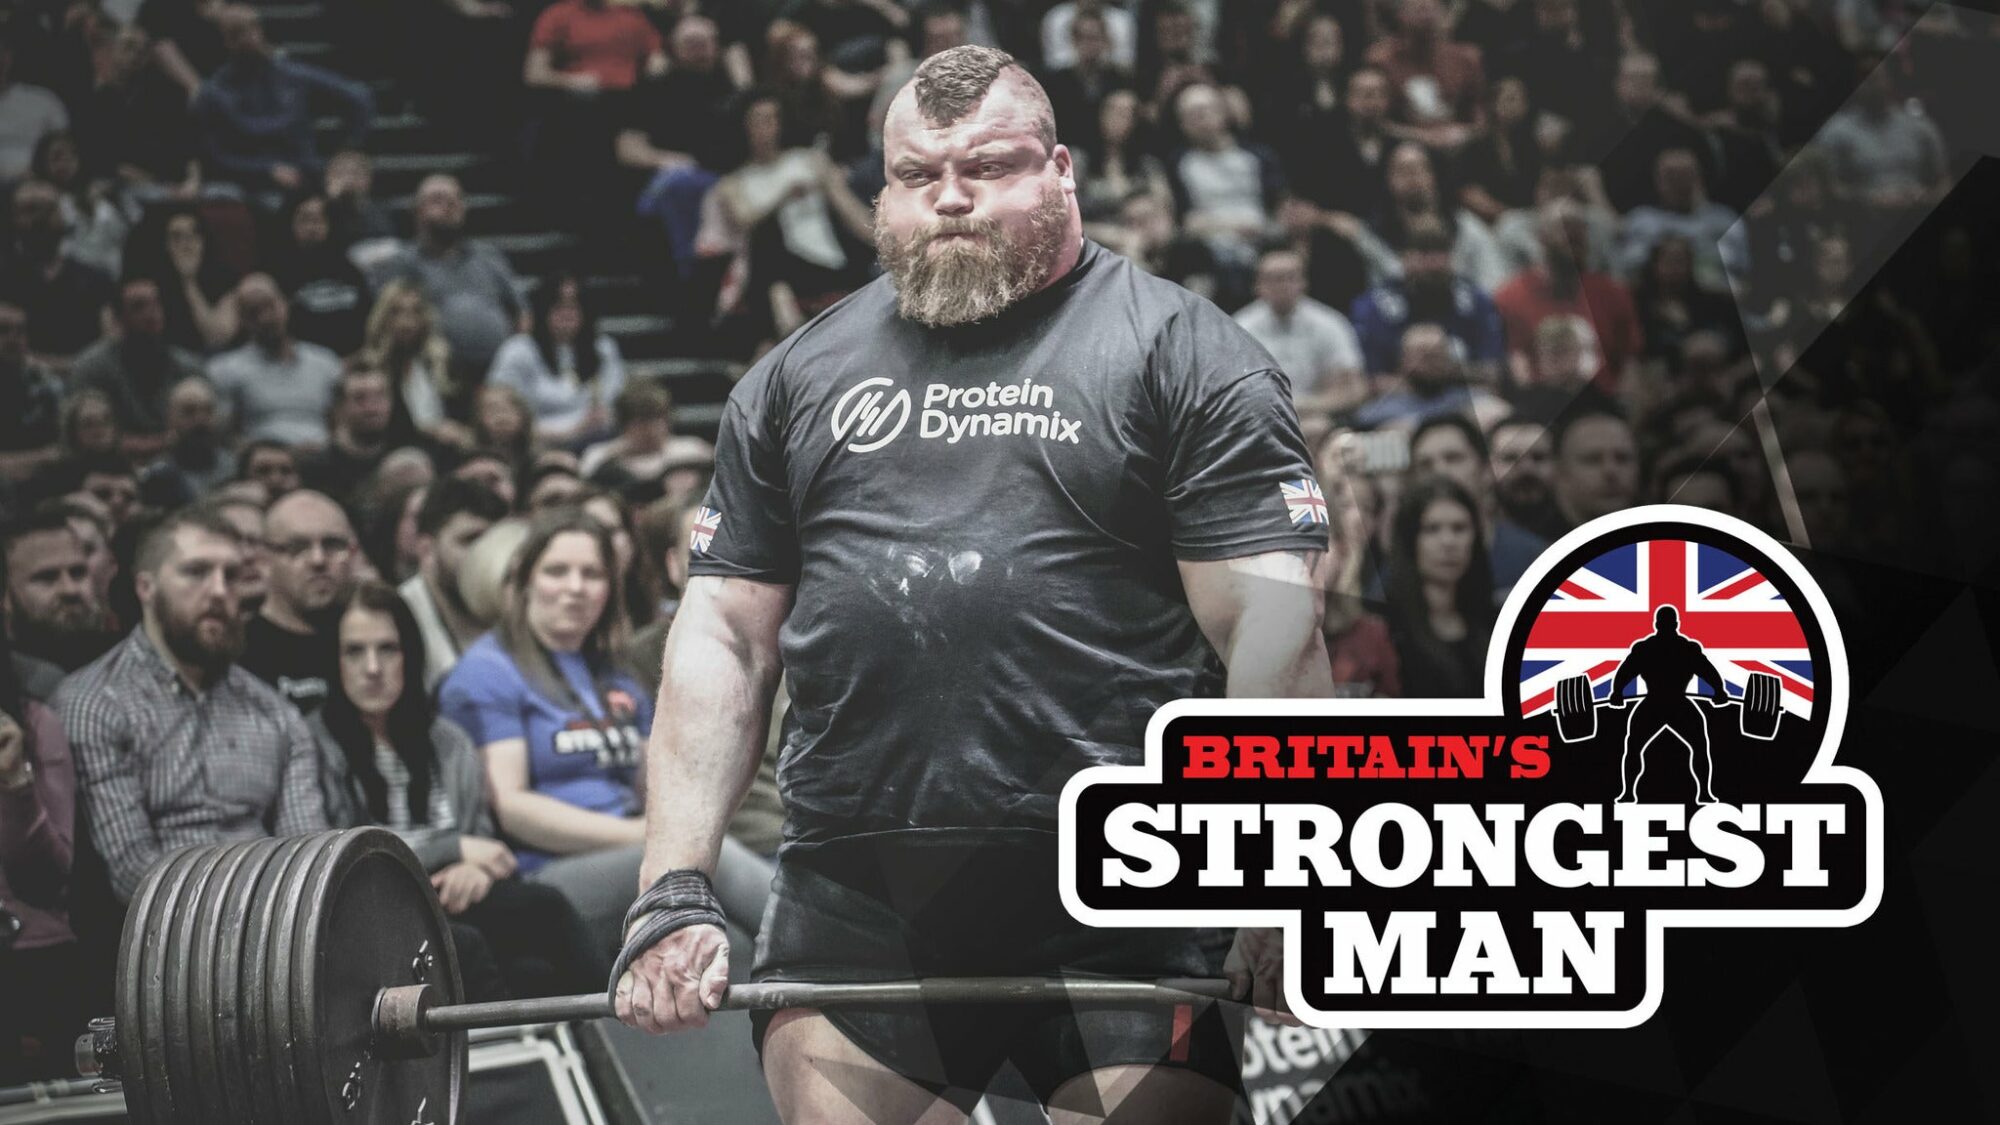 Image name Britains Strongest Man Hospitality Experiences at Utilita Arena Sheffield Sheffield the 13 image from the post Events in Yorkshire.com.